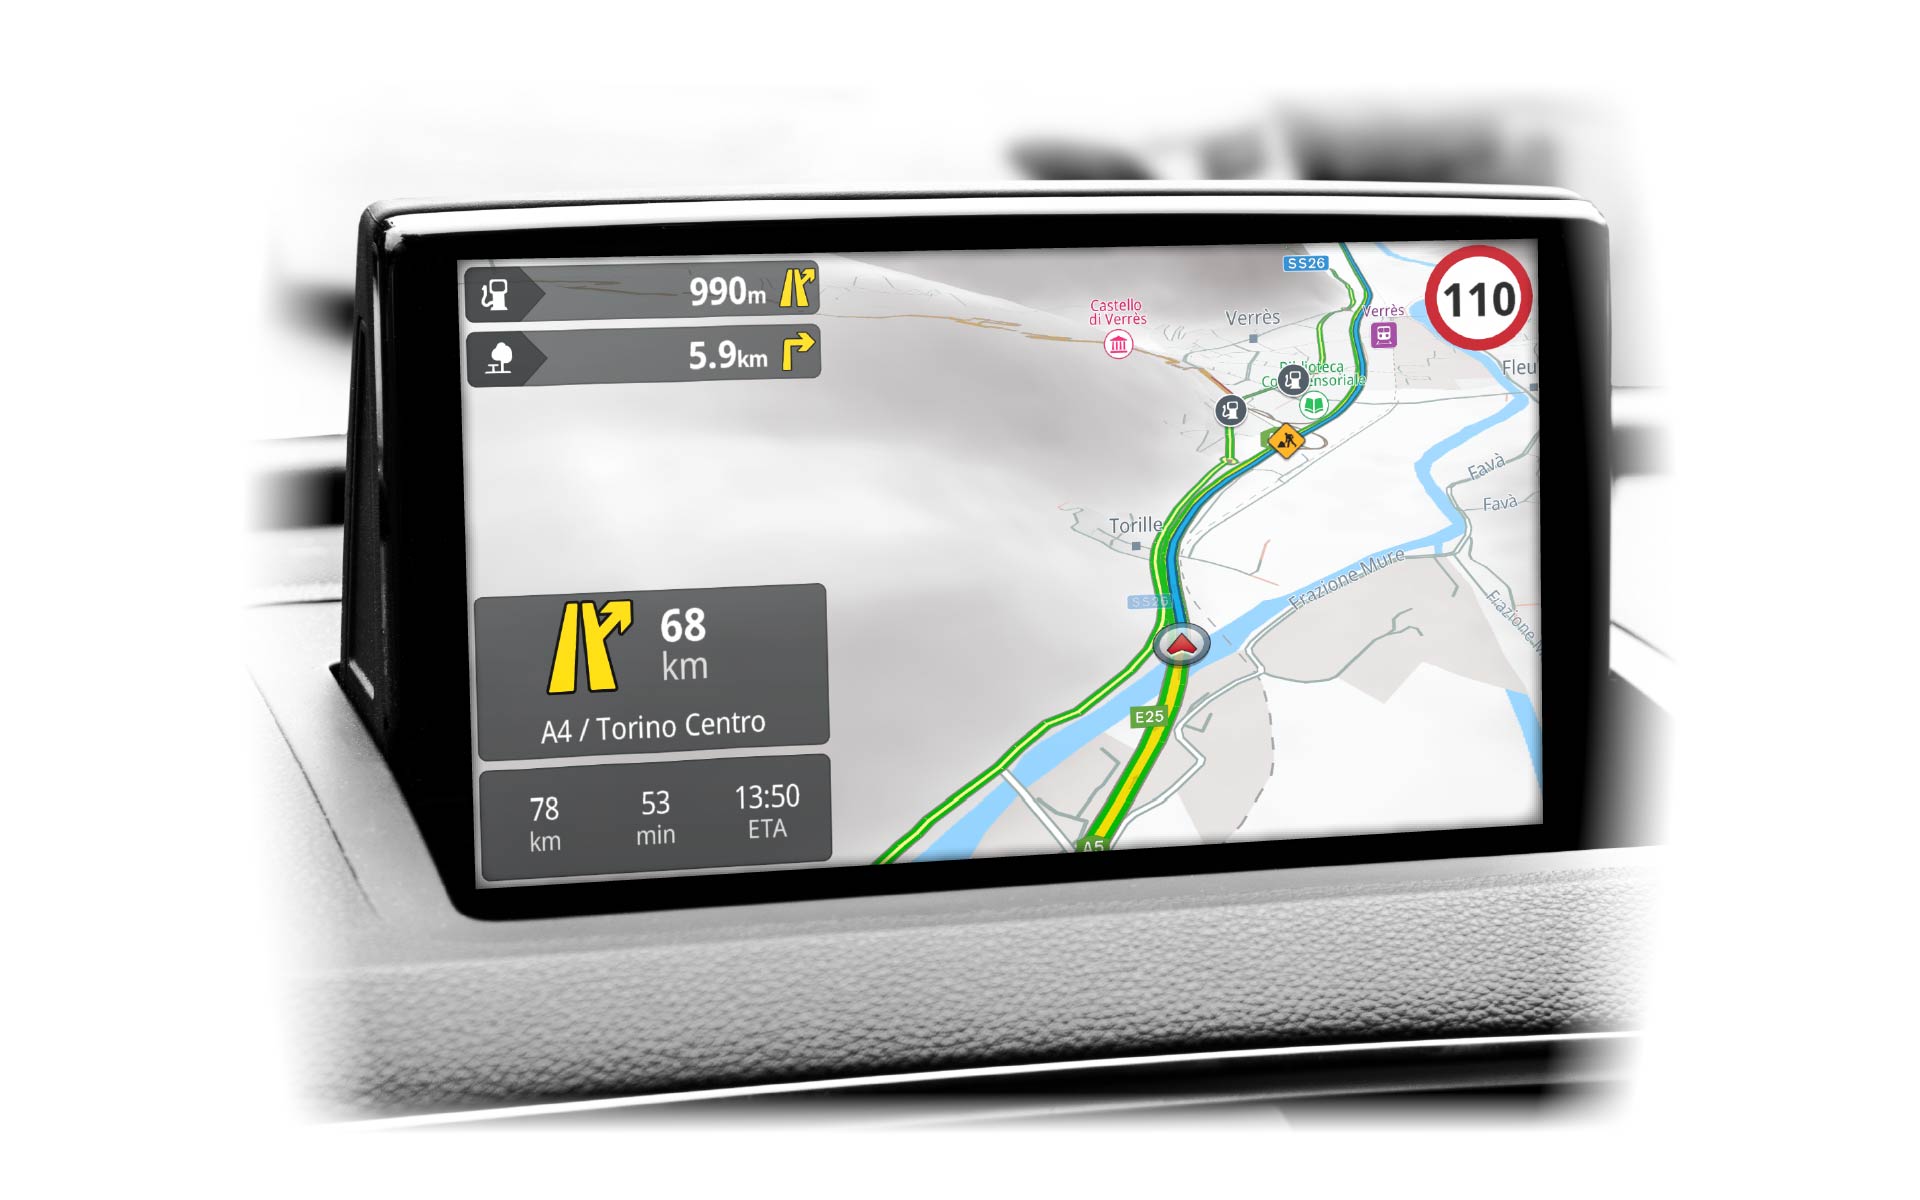 Mireo GPS navigation solutions provide global HERE maps of more than 130 countries, including China, Japan, South Korea, and India.